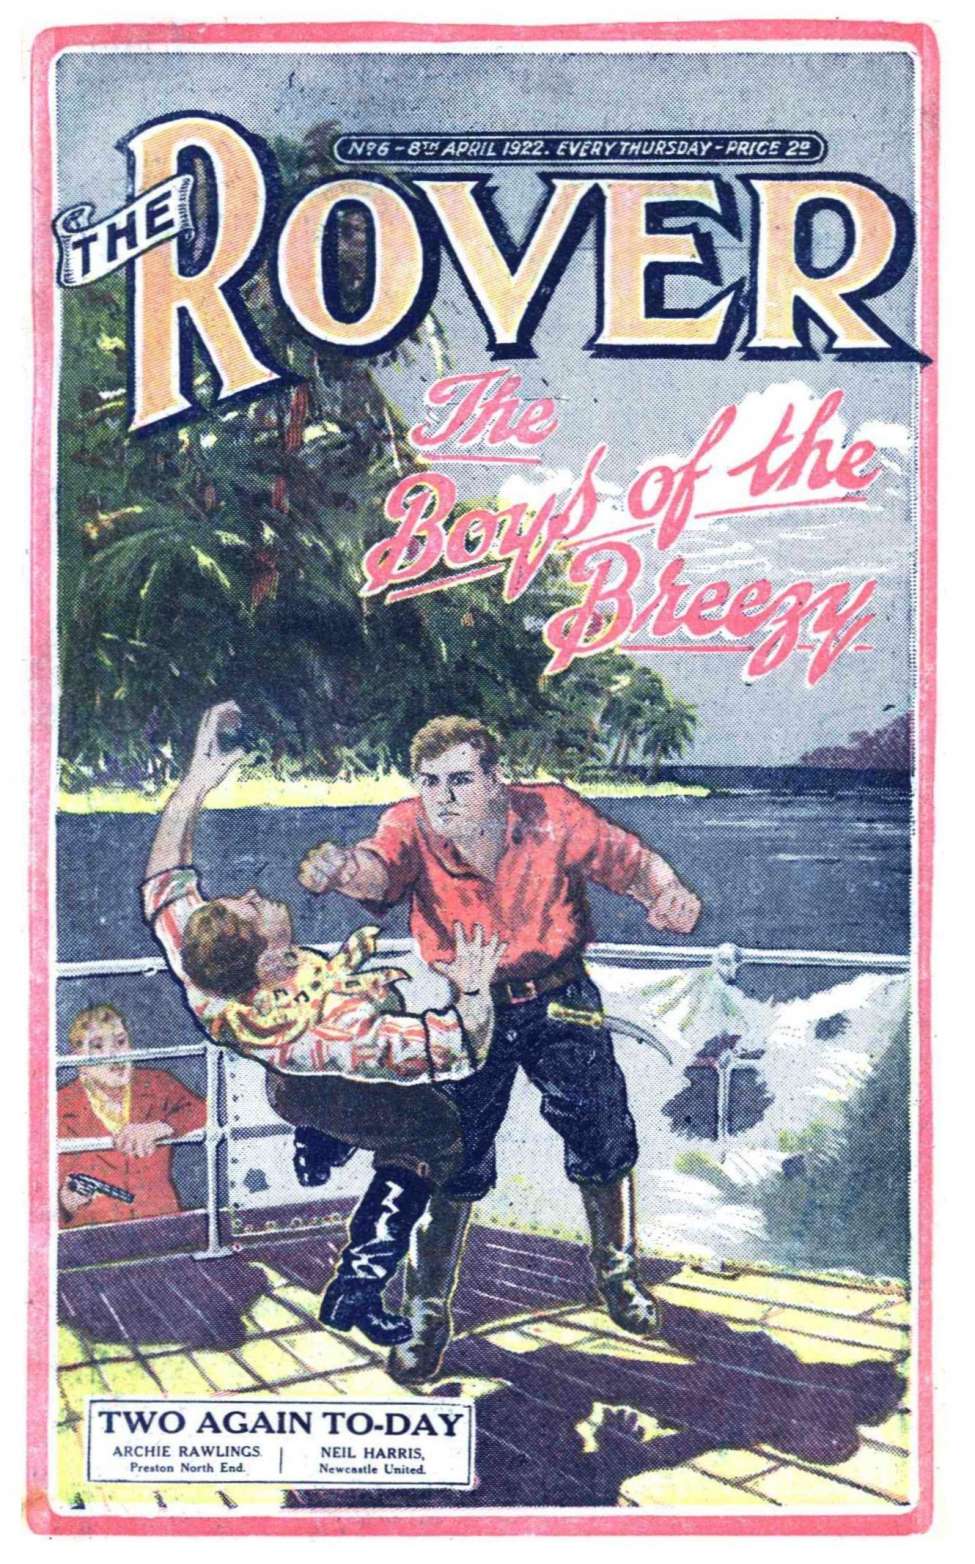 Book Cover For The Rover 6